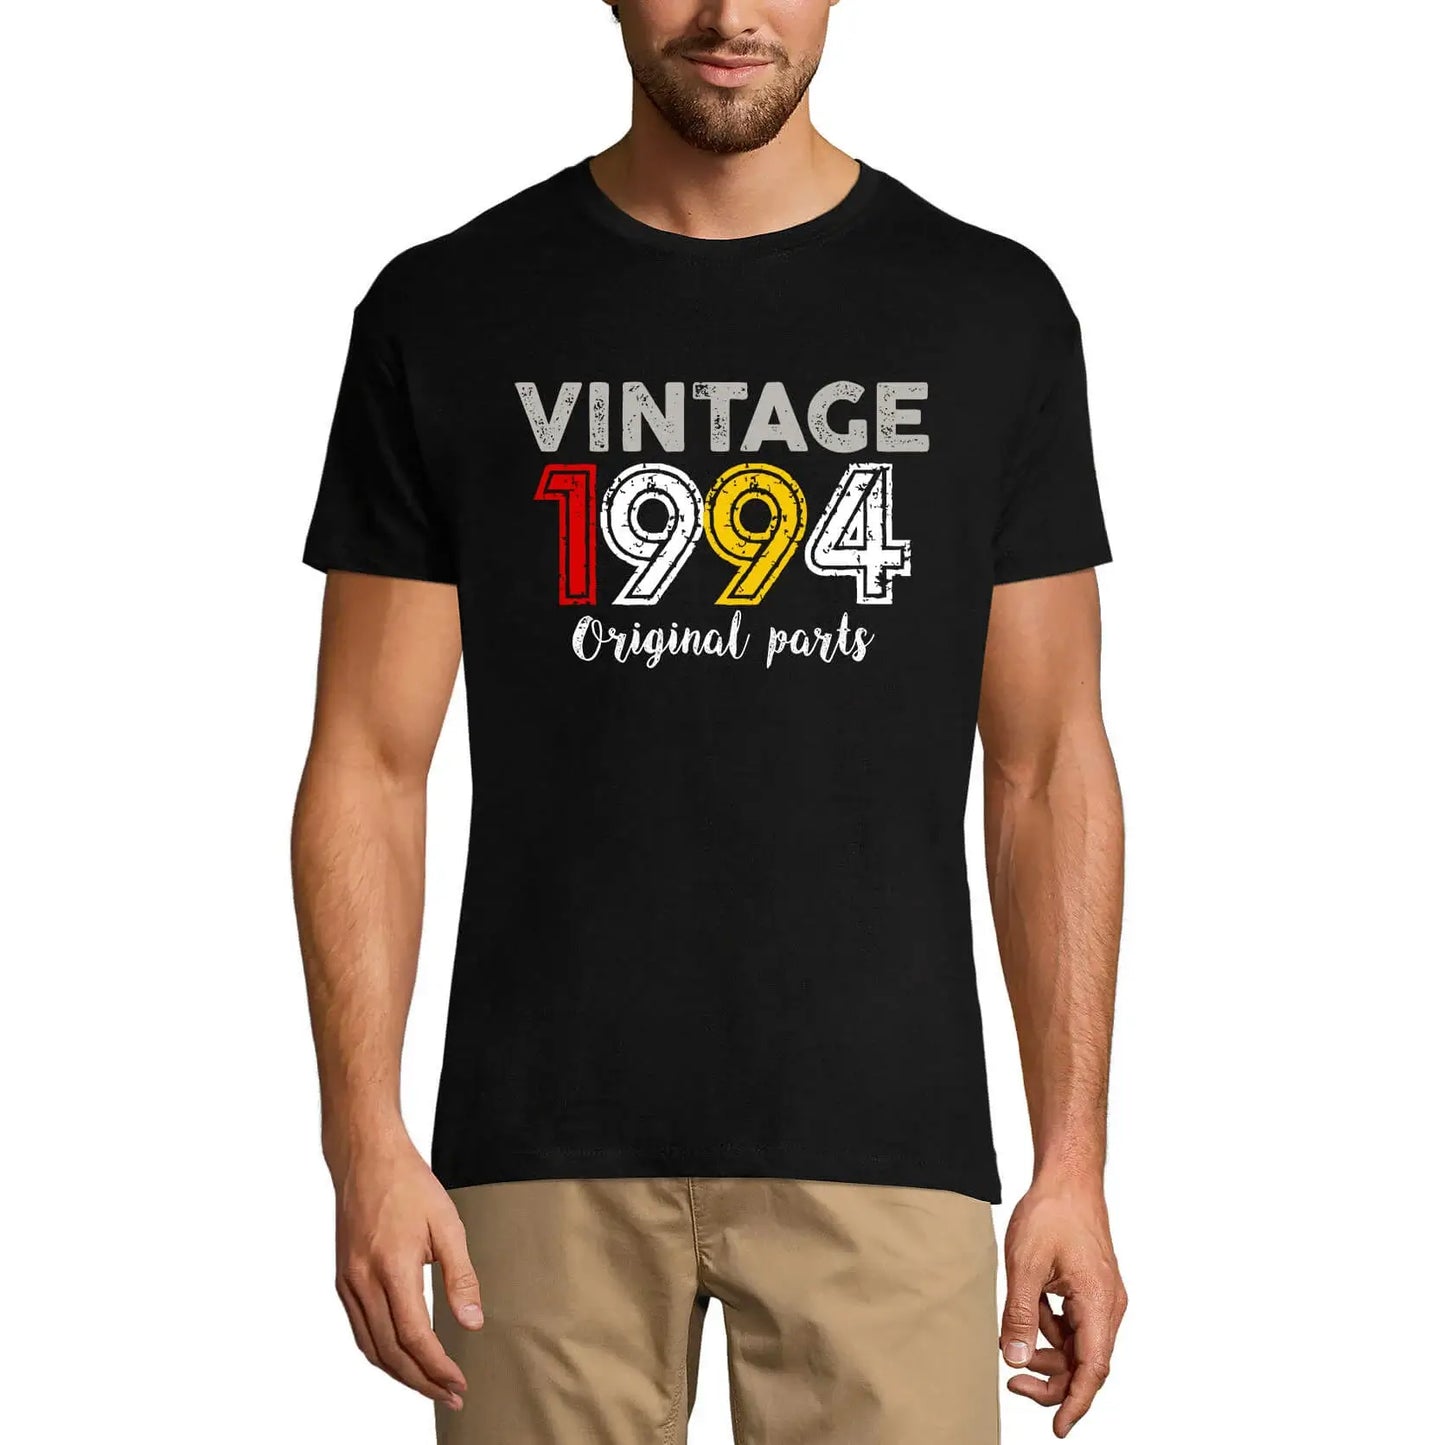 Men's Graphic T-Shirt Original Parts 1994 30th Birthday Anniversary 30 Year Old Gift 1994 Vintage Eco-Friendly Short Sleeve Novelty Tee